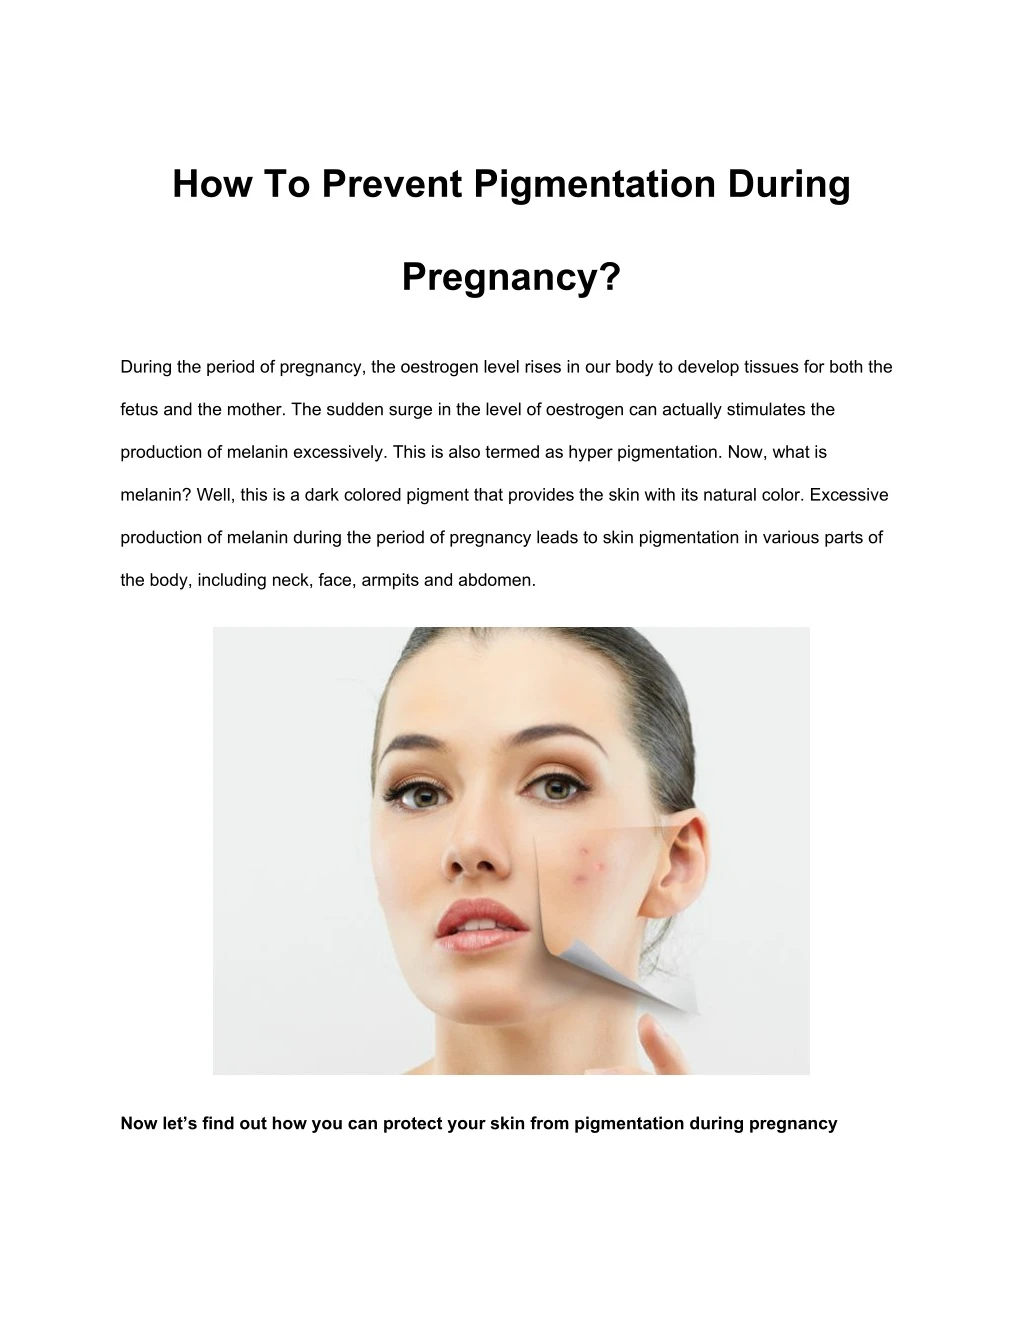 how to prevent pigmentation during